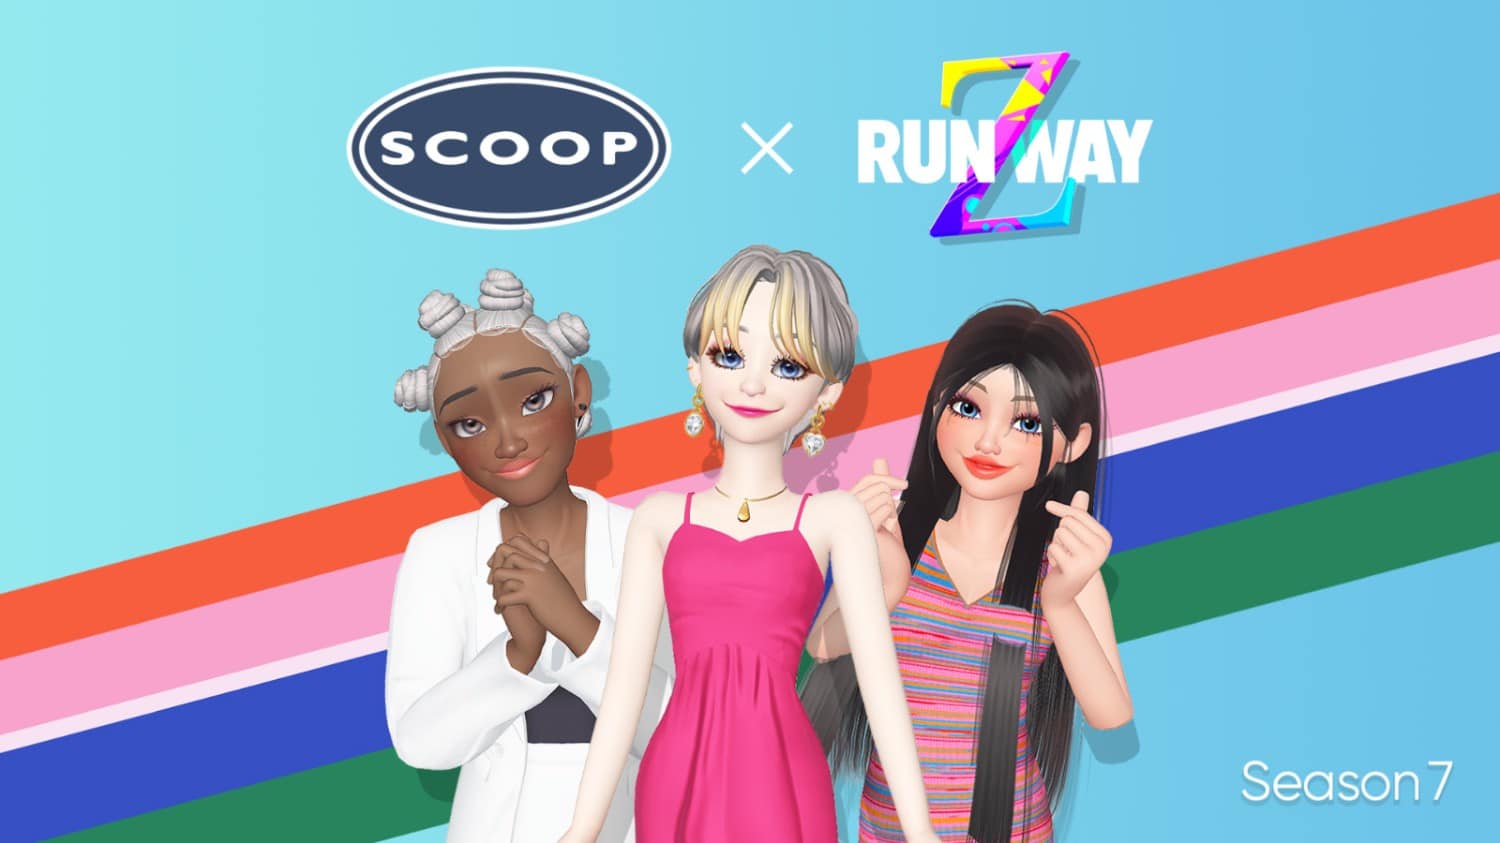 Walmart's clothing brand Scoop took over the fashion space, Runway Z, within the mobile virtual world ZEPETO